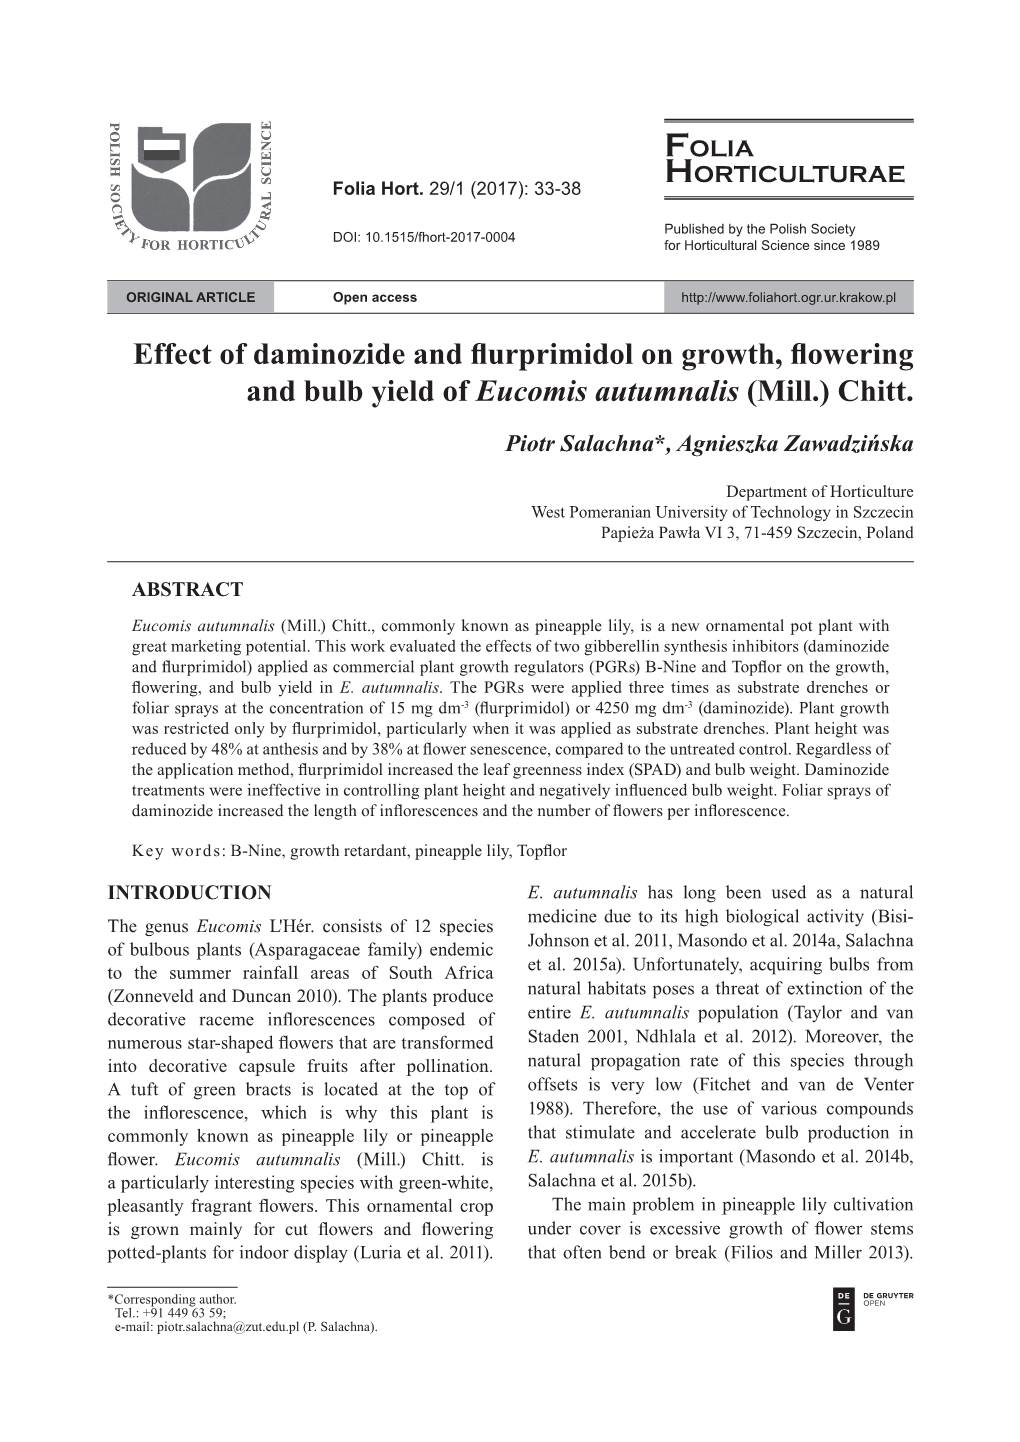 Effect of Daminozide and Flurprimidol on Growth, Flowering and Bulb Yield of Eucomis Autumnalis (Mill.) Chitt